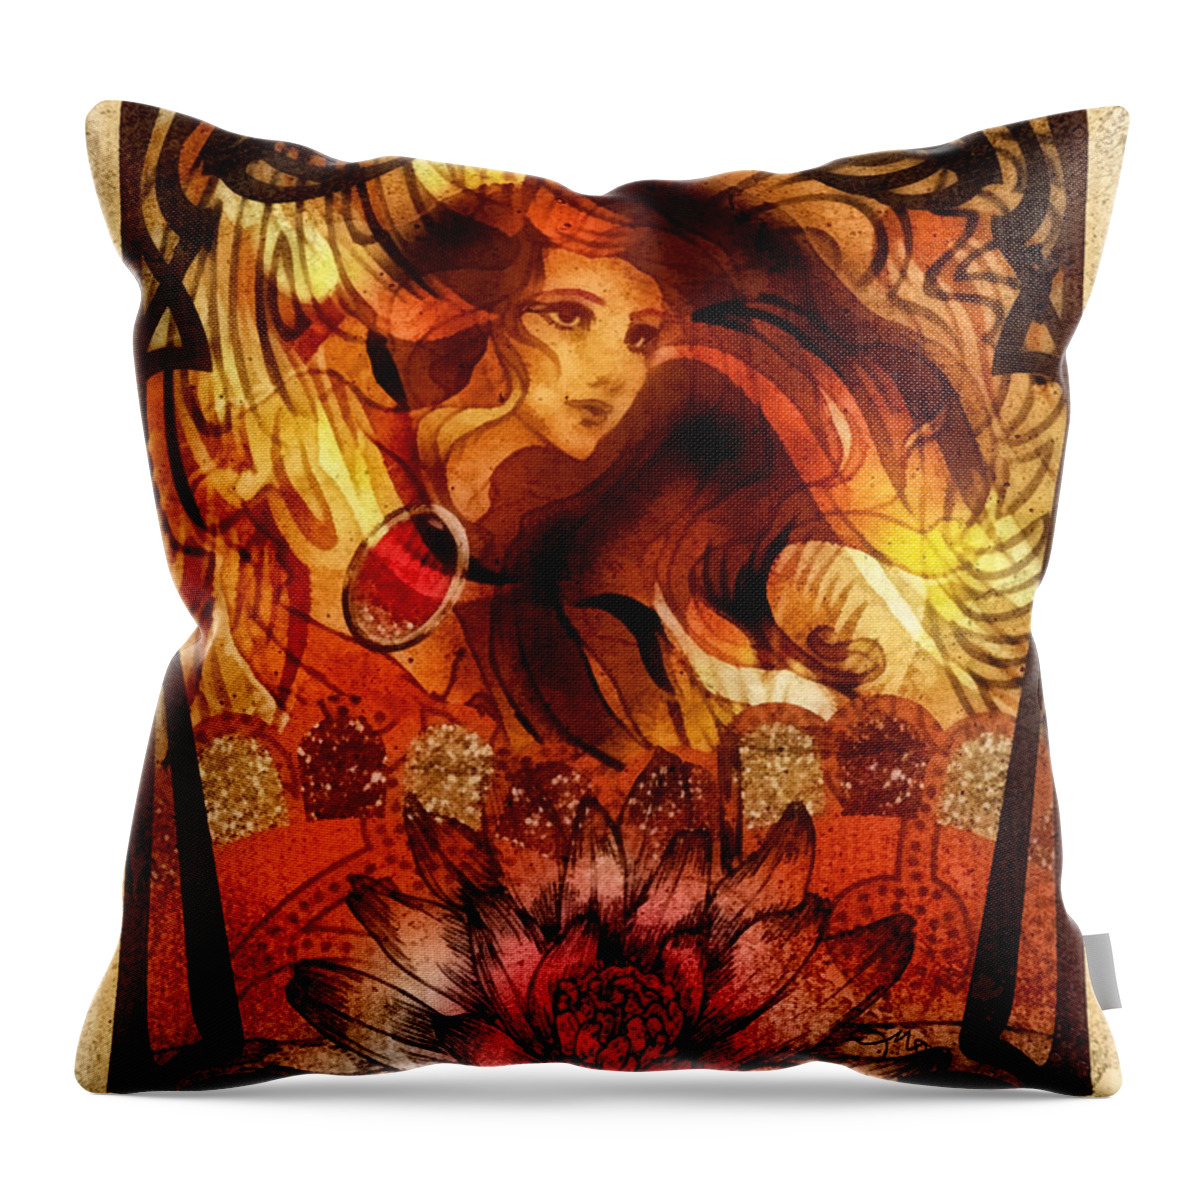 Desire Throw Pillow featuring the painting Desire by Mo T